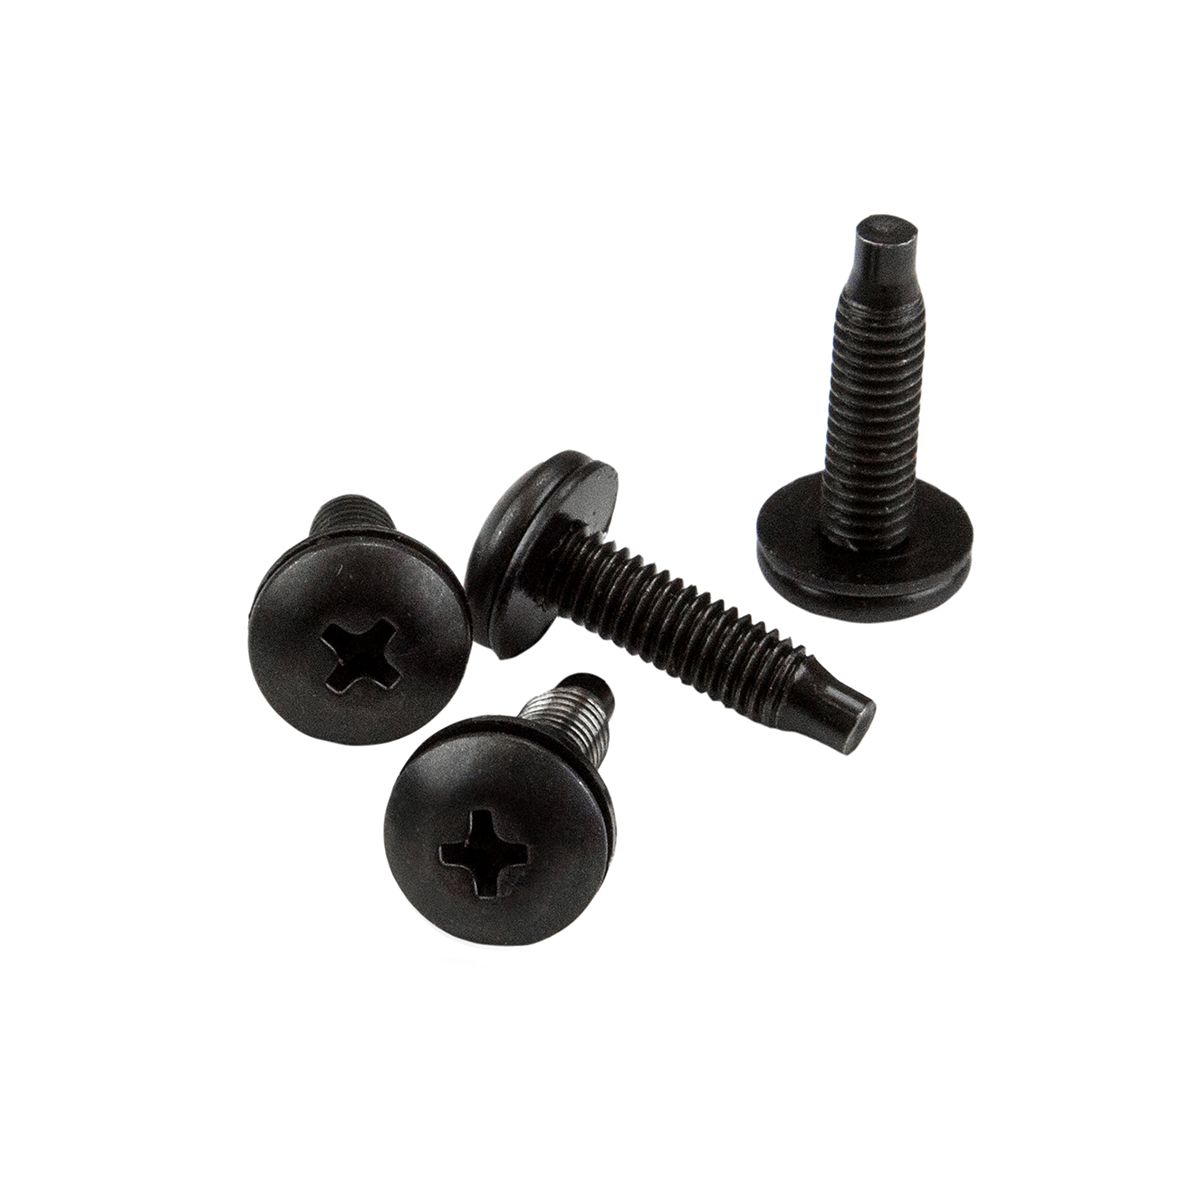 StarTech.com Metal Screws for Use with Server Racks and Cabinets, #1032 Thread, 50 per Package